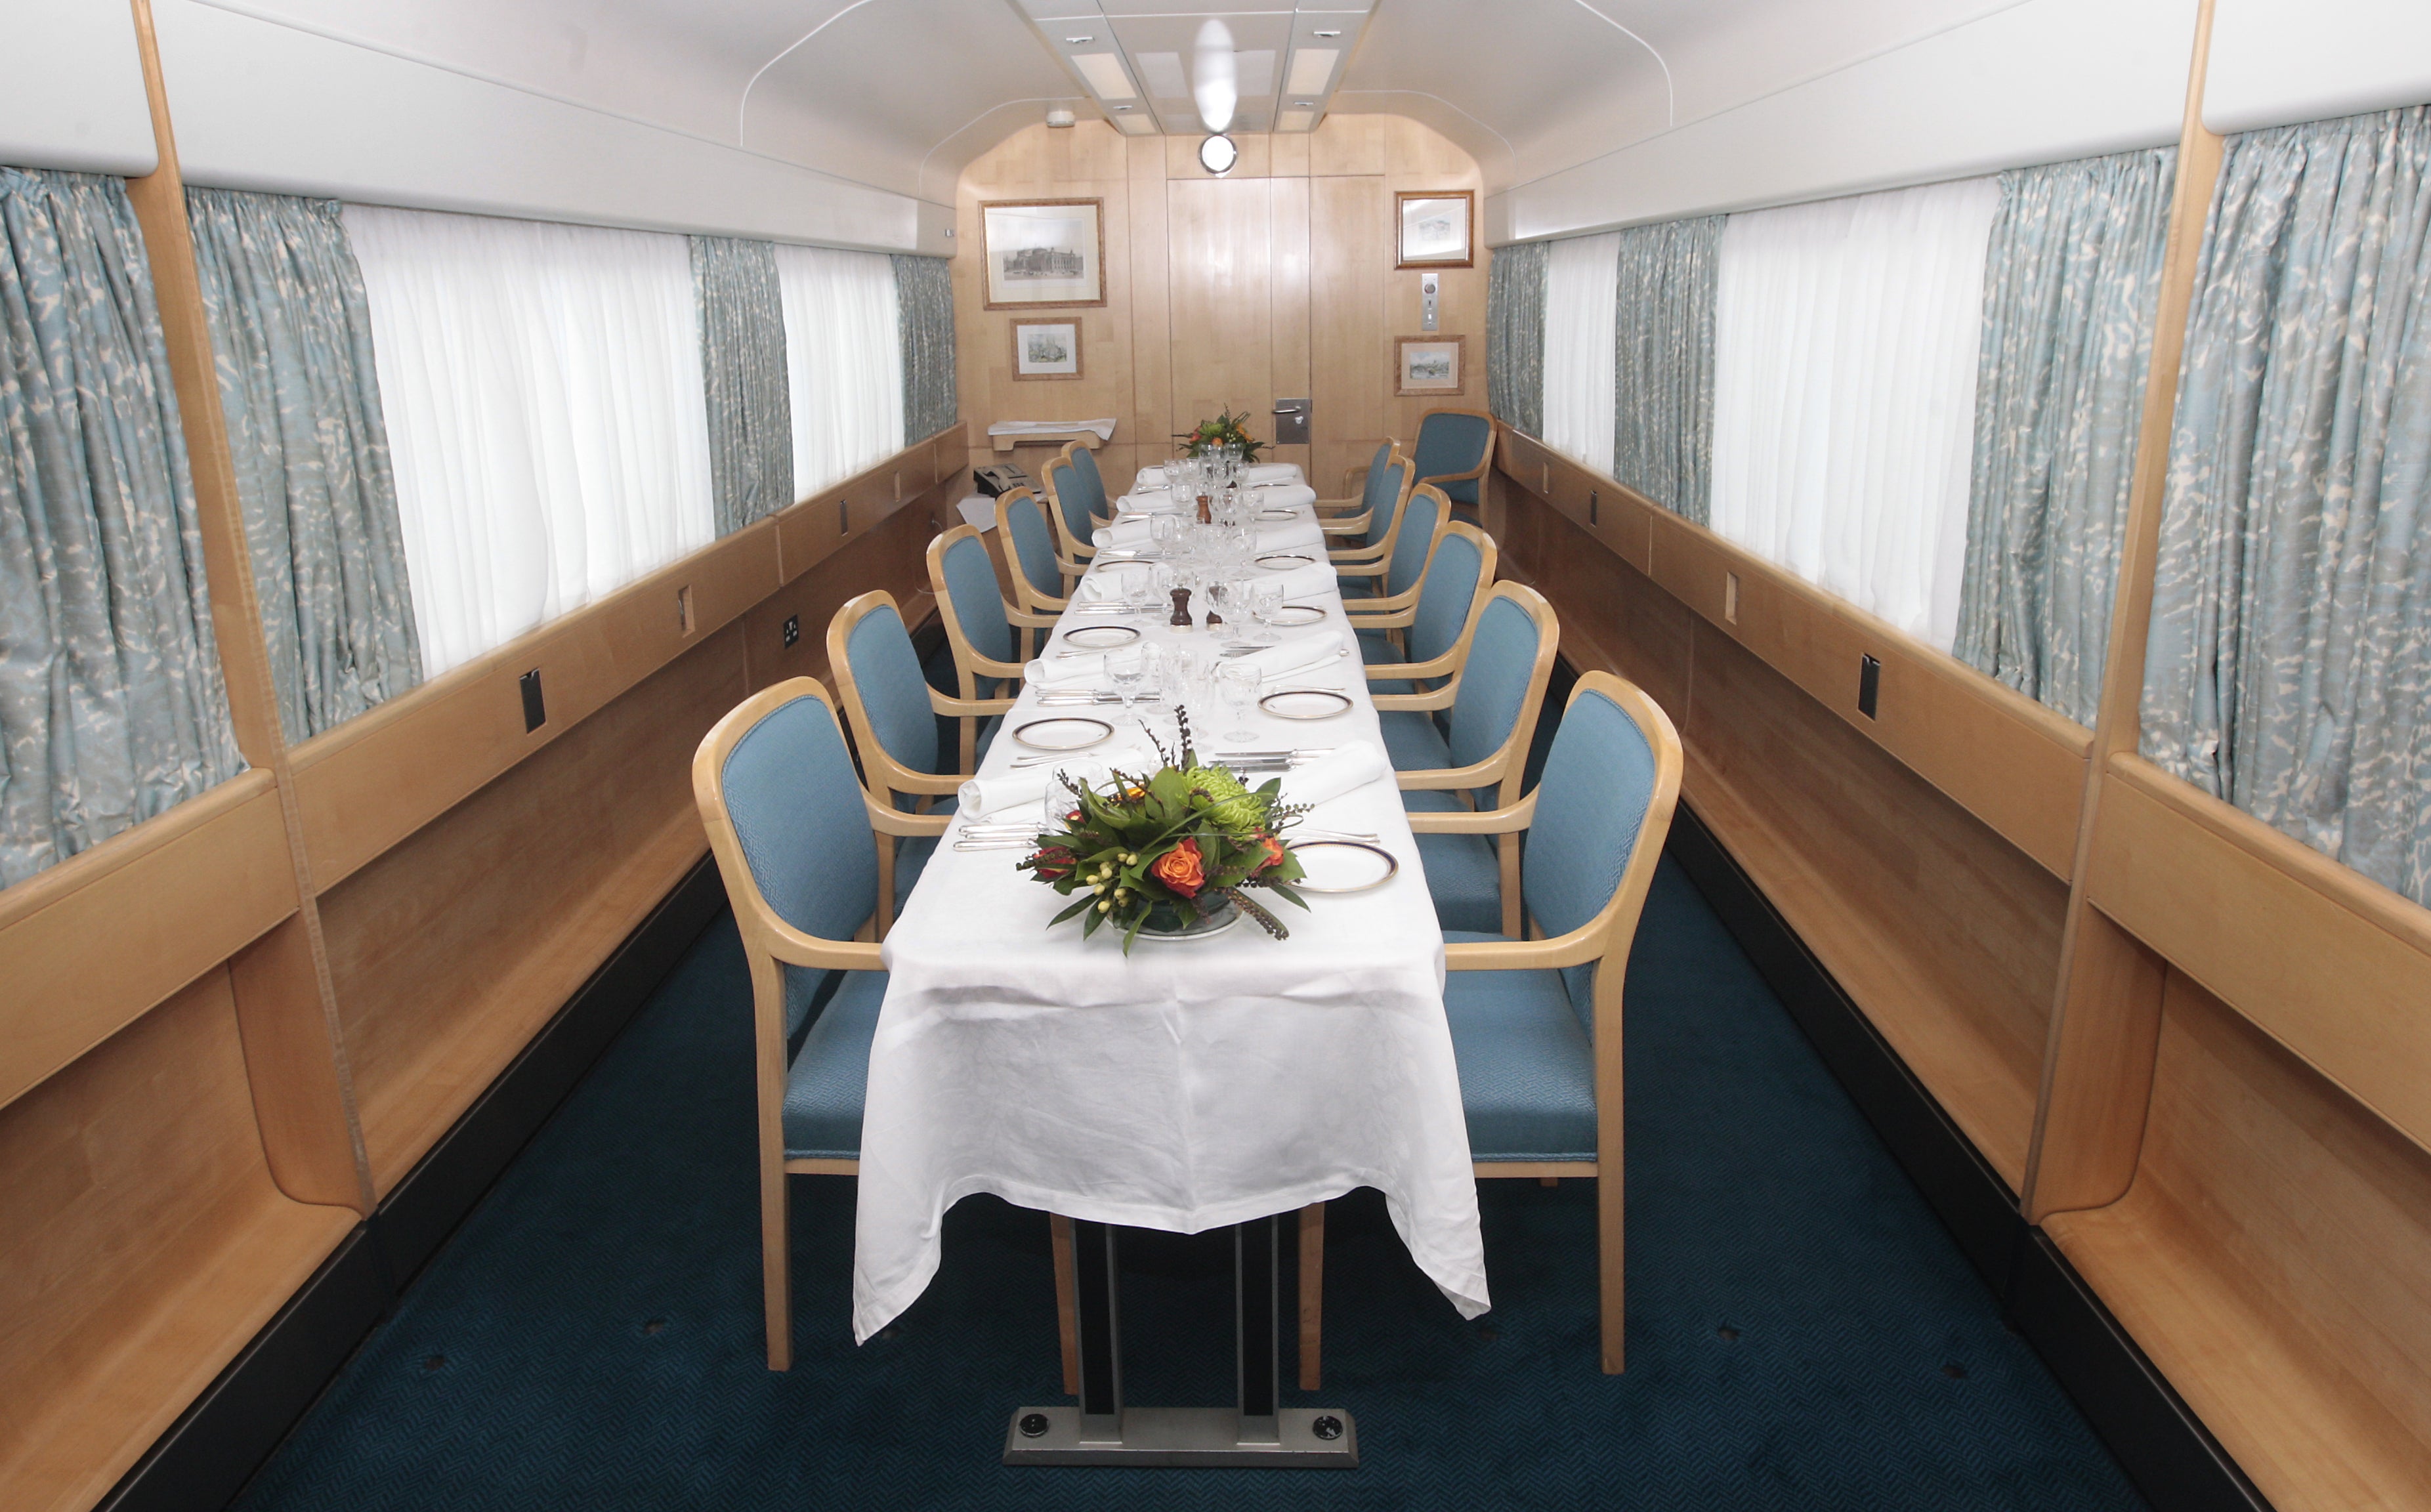 The 12-seat dining carriage